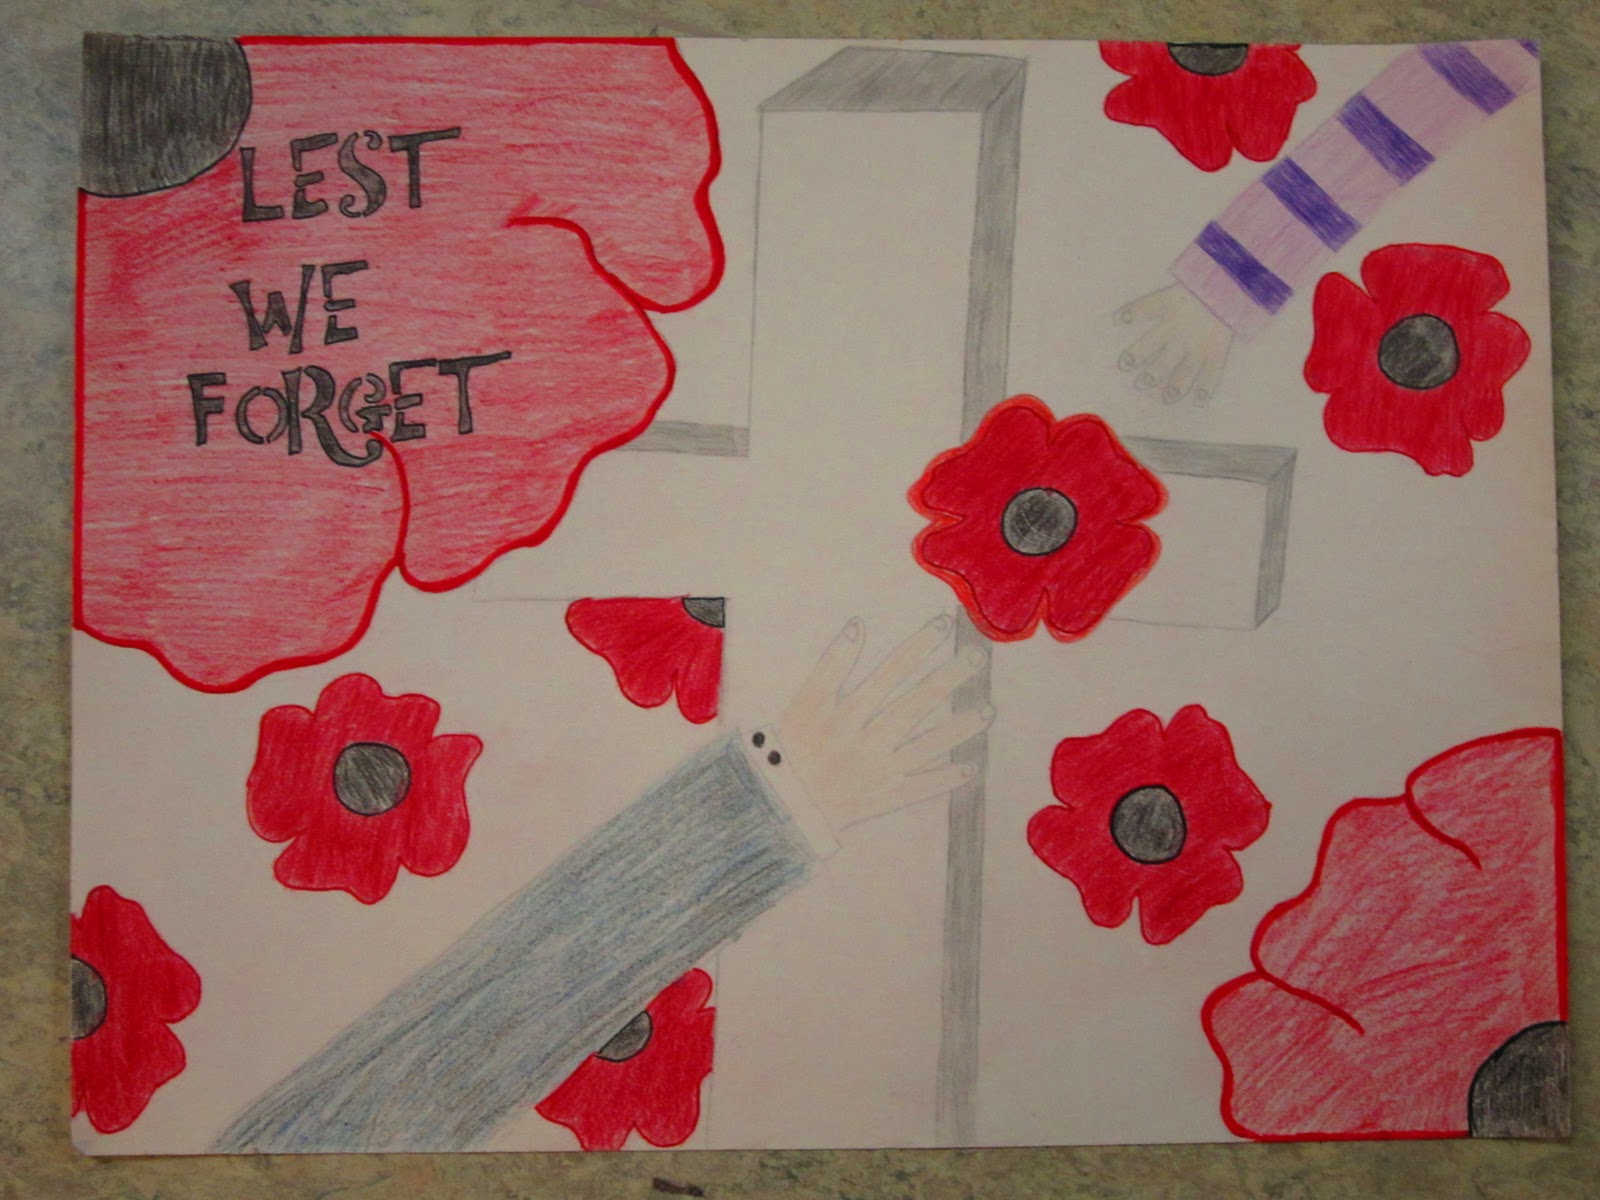 What are some good poems for Remembrance Day?